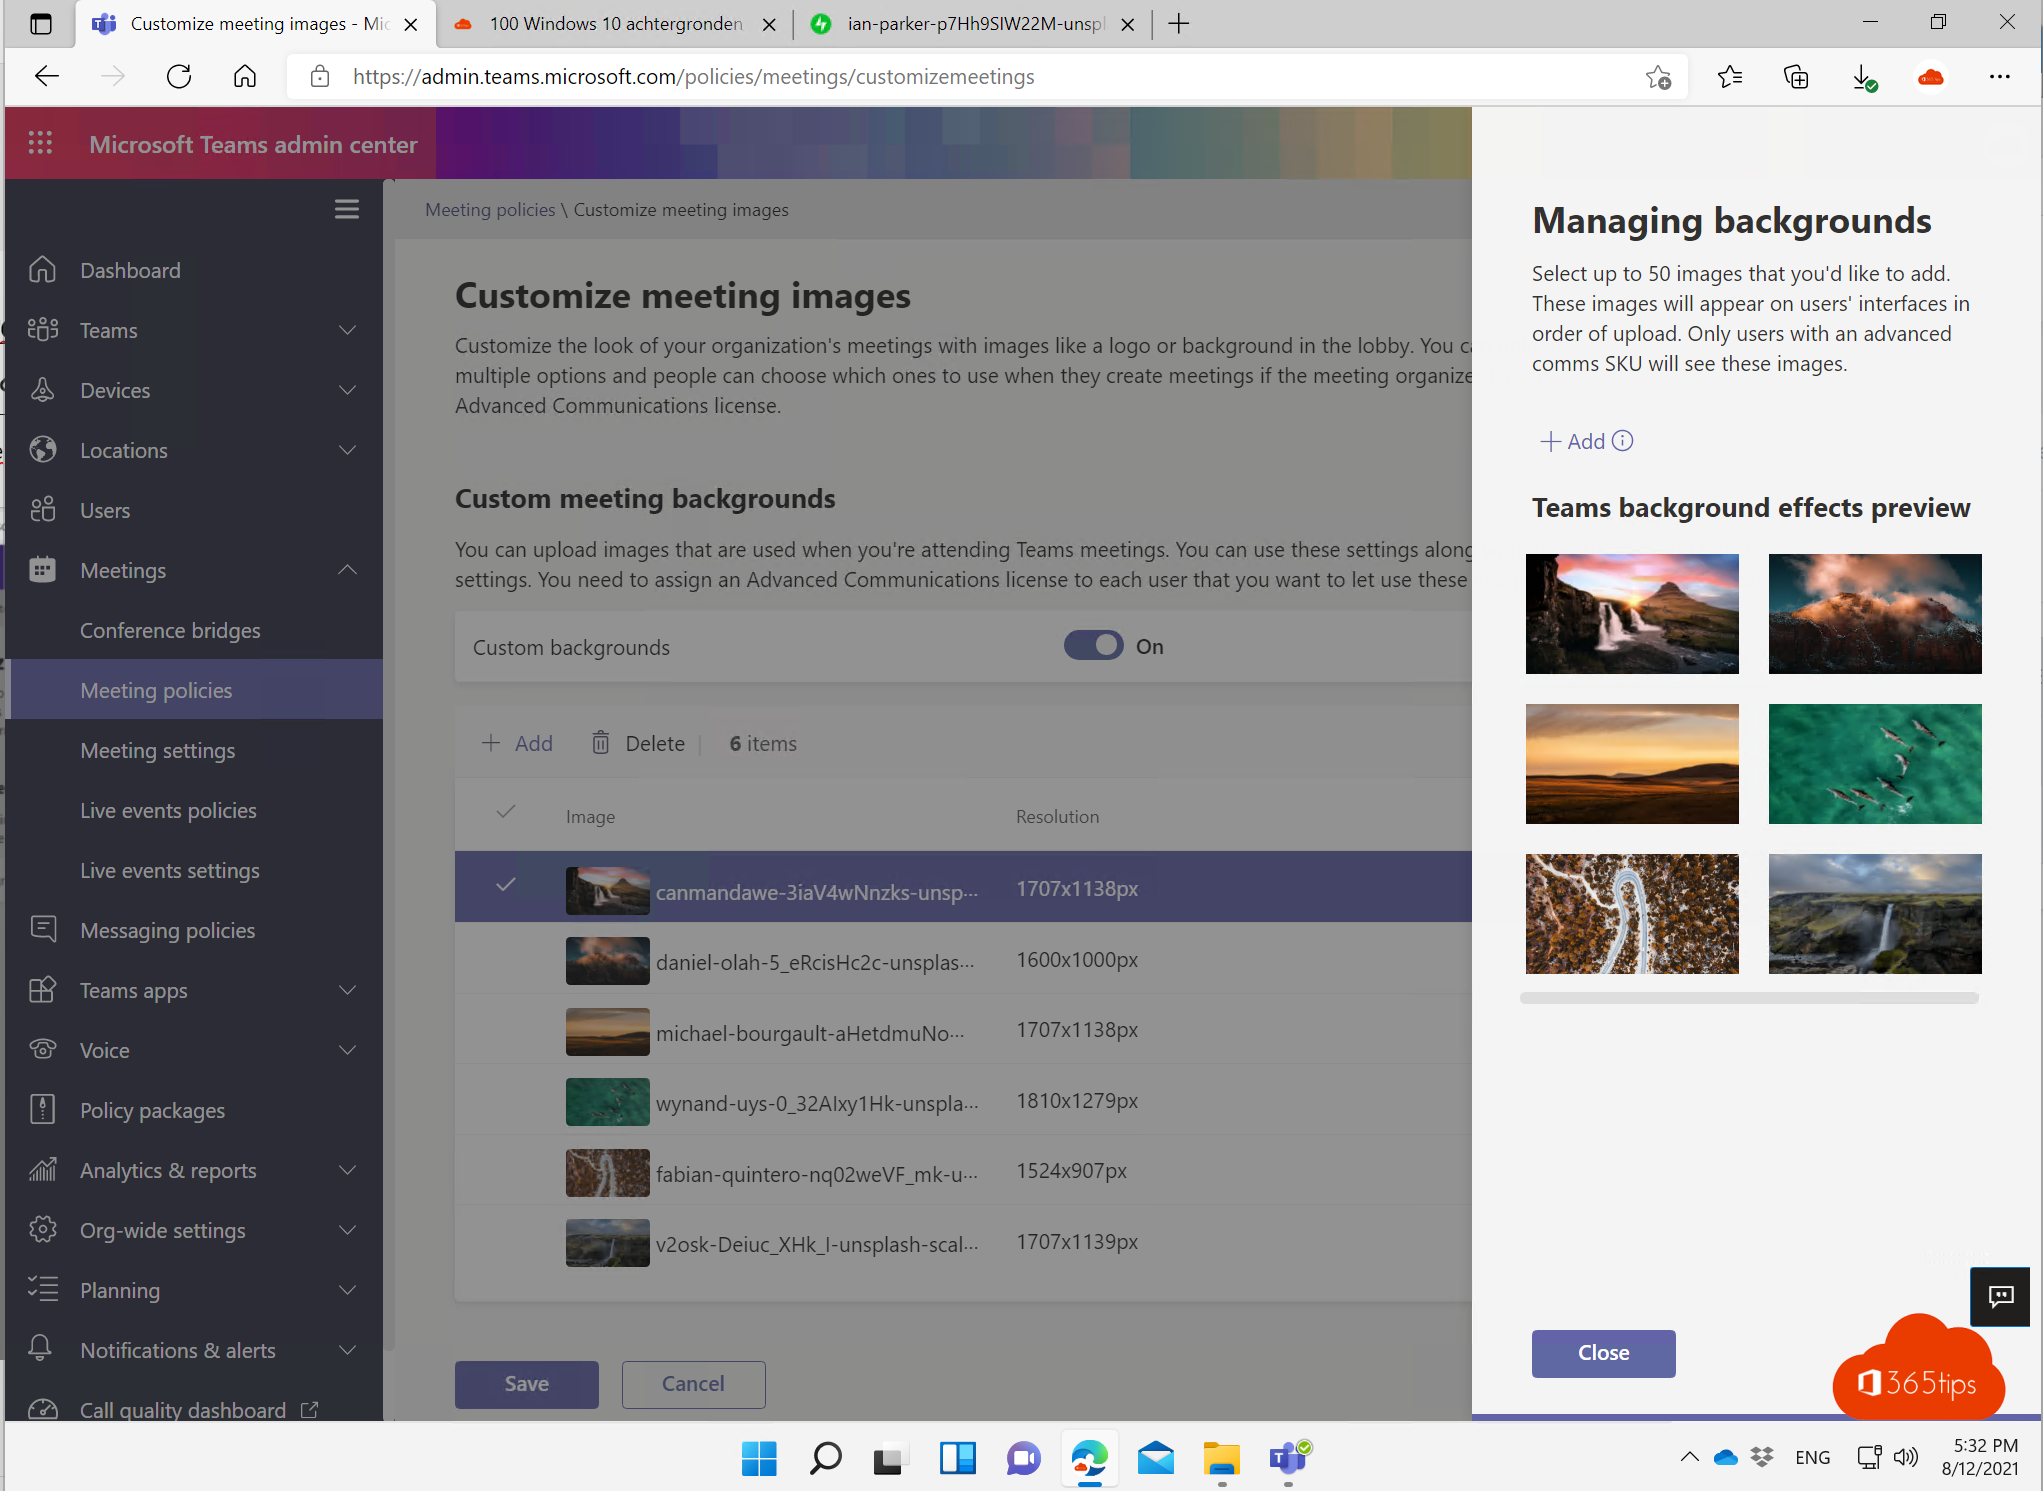 How to configure organization-wide backgrounds in Microsoft Teams?